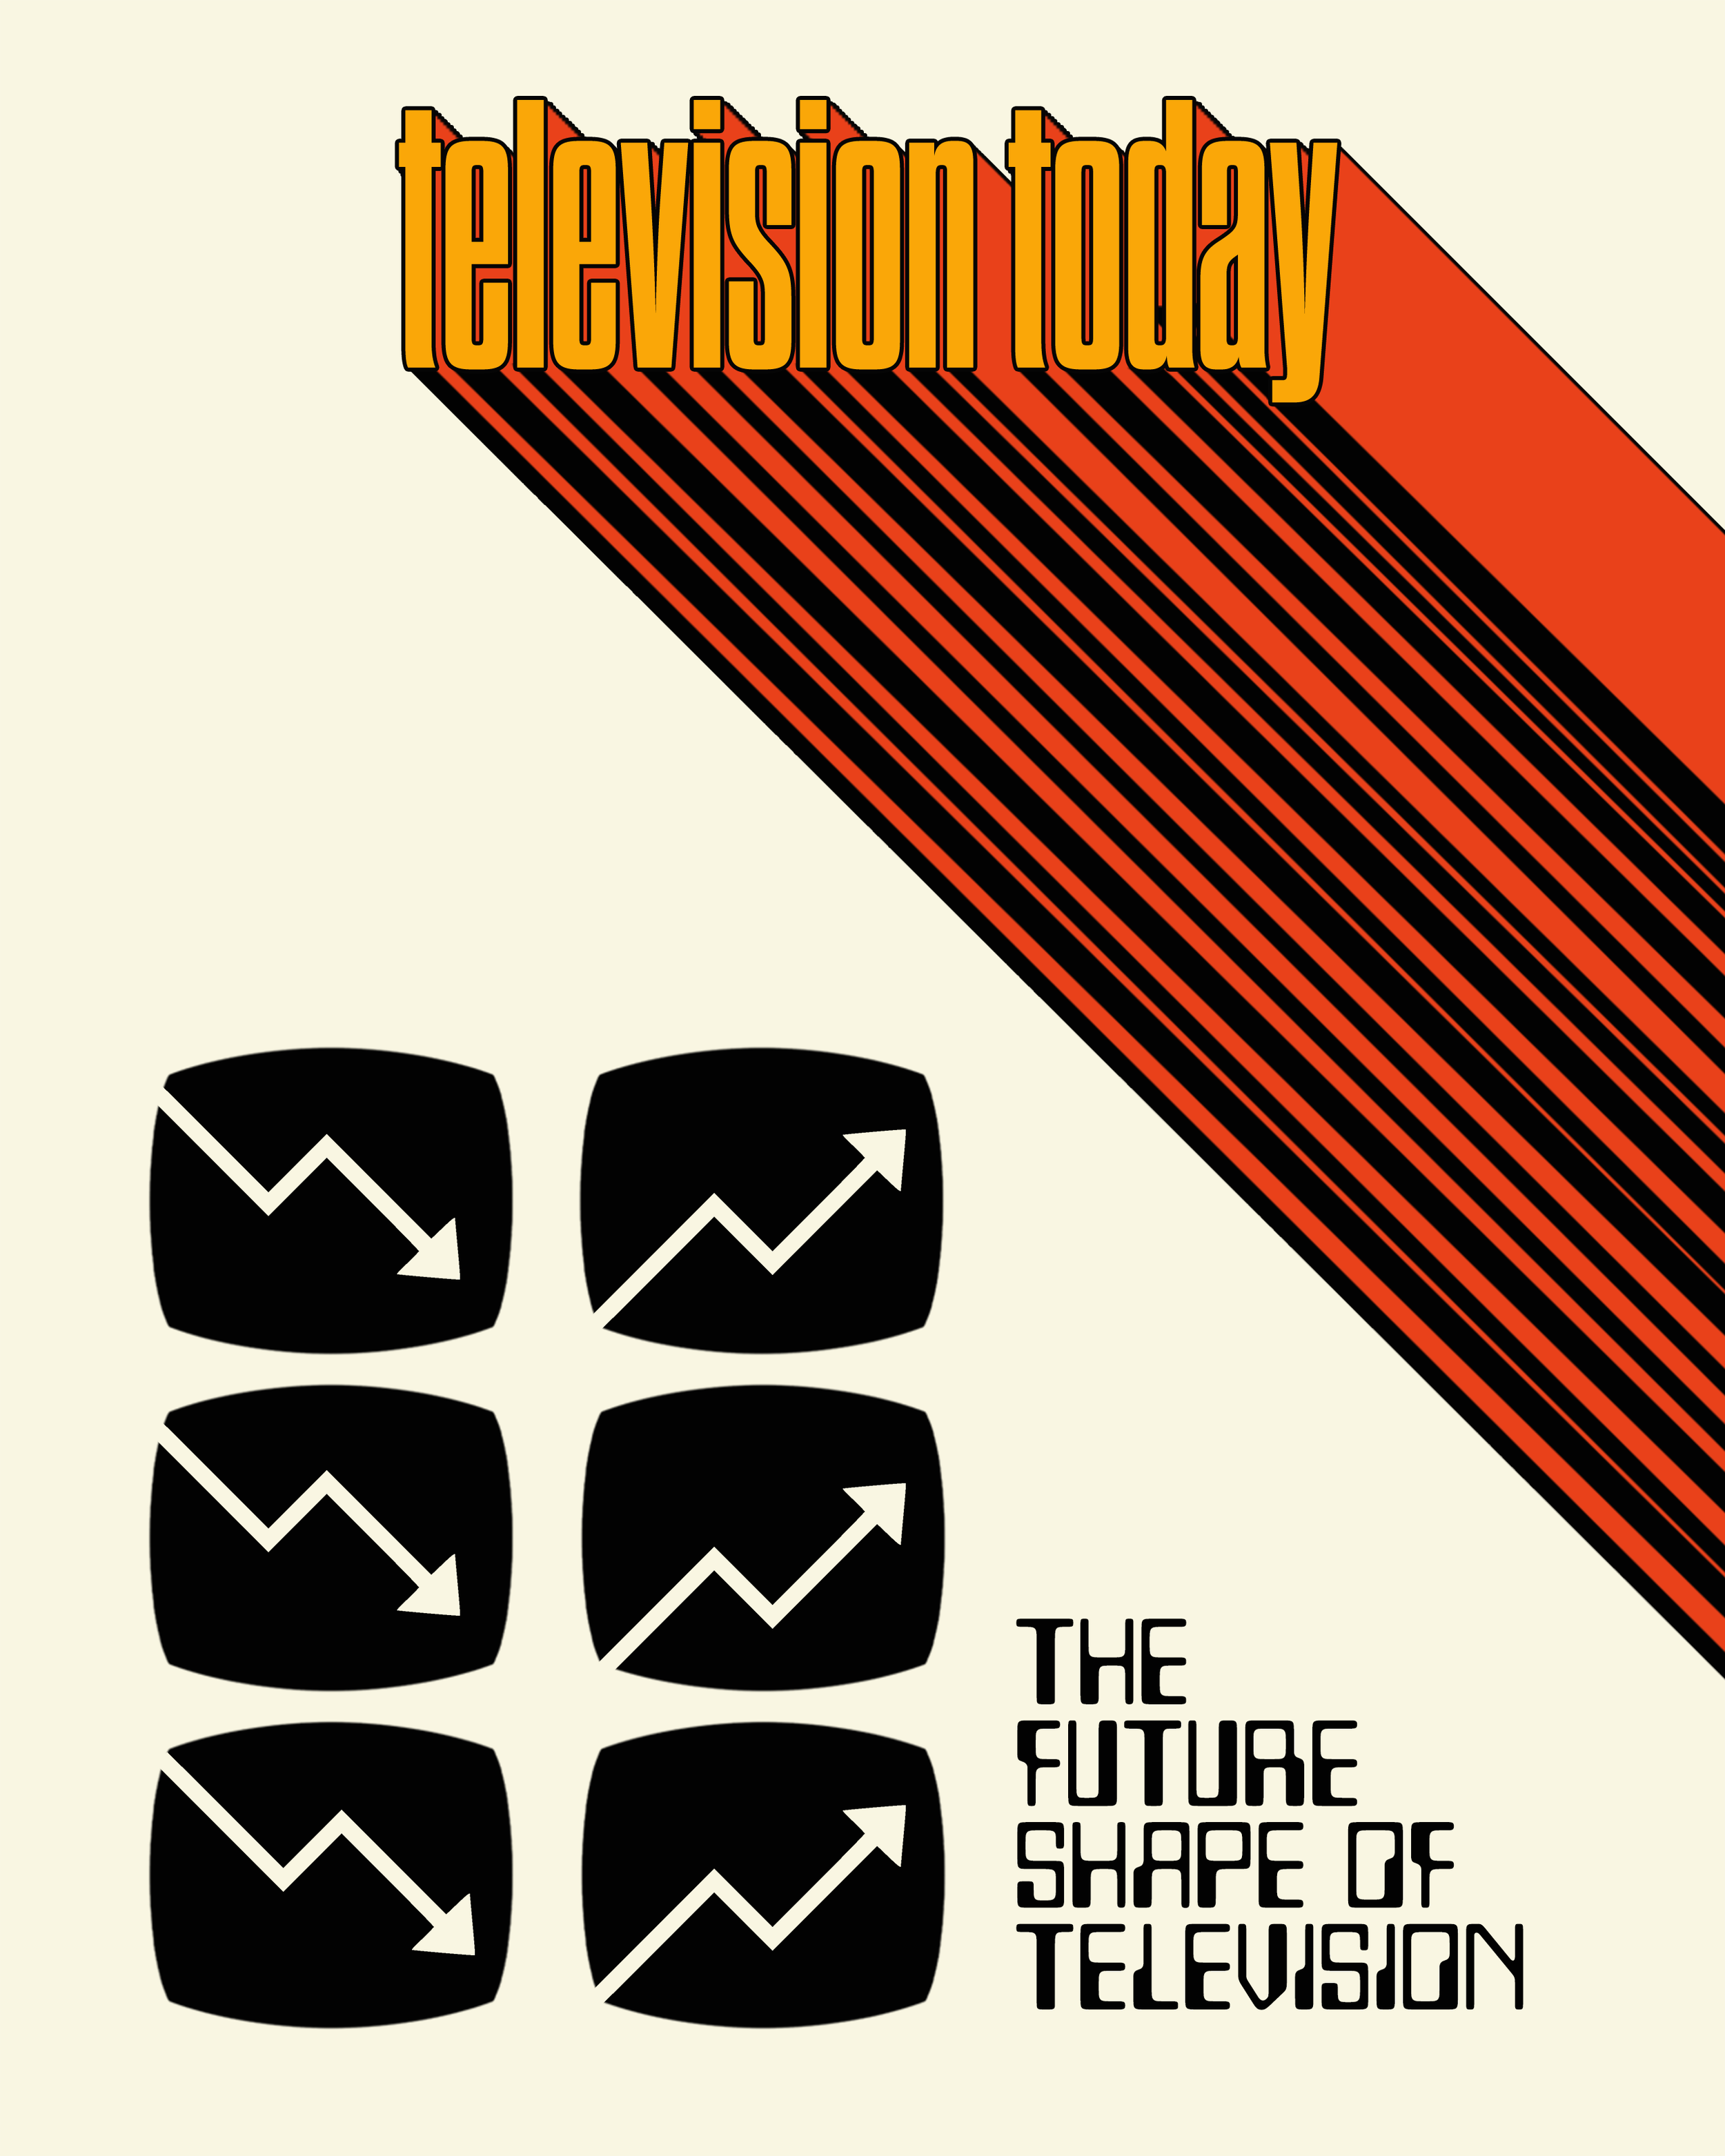 TelevisionTodayCover.png